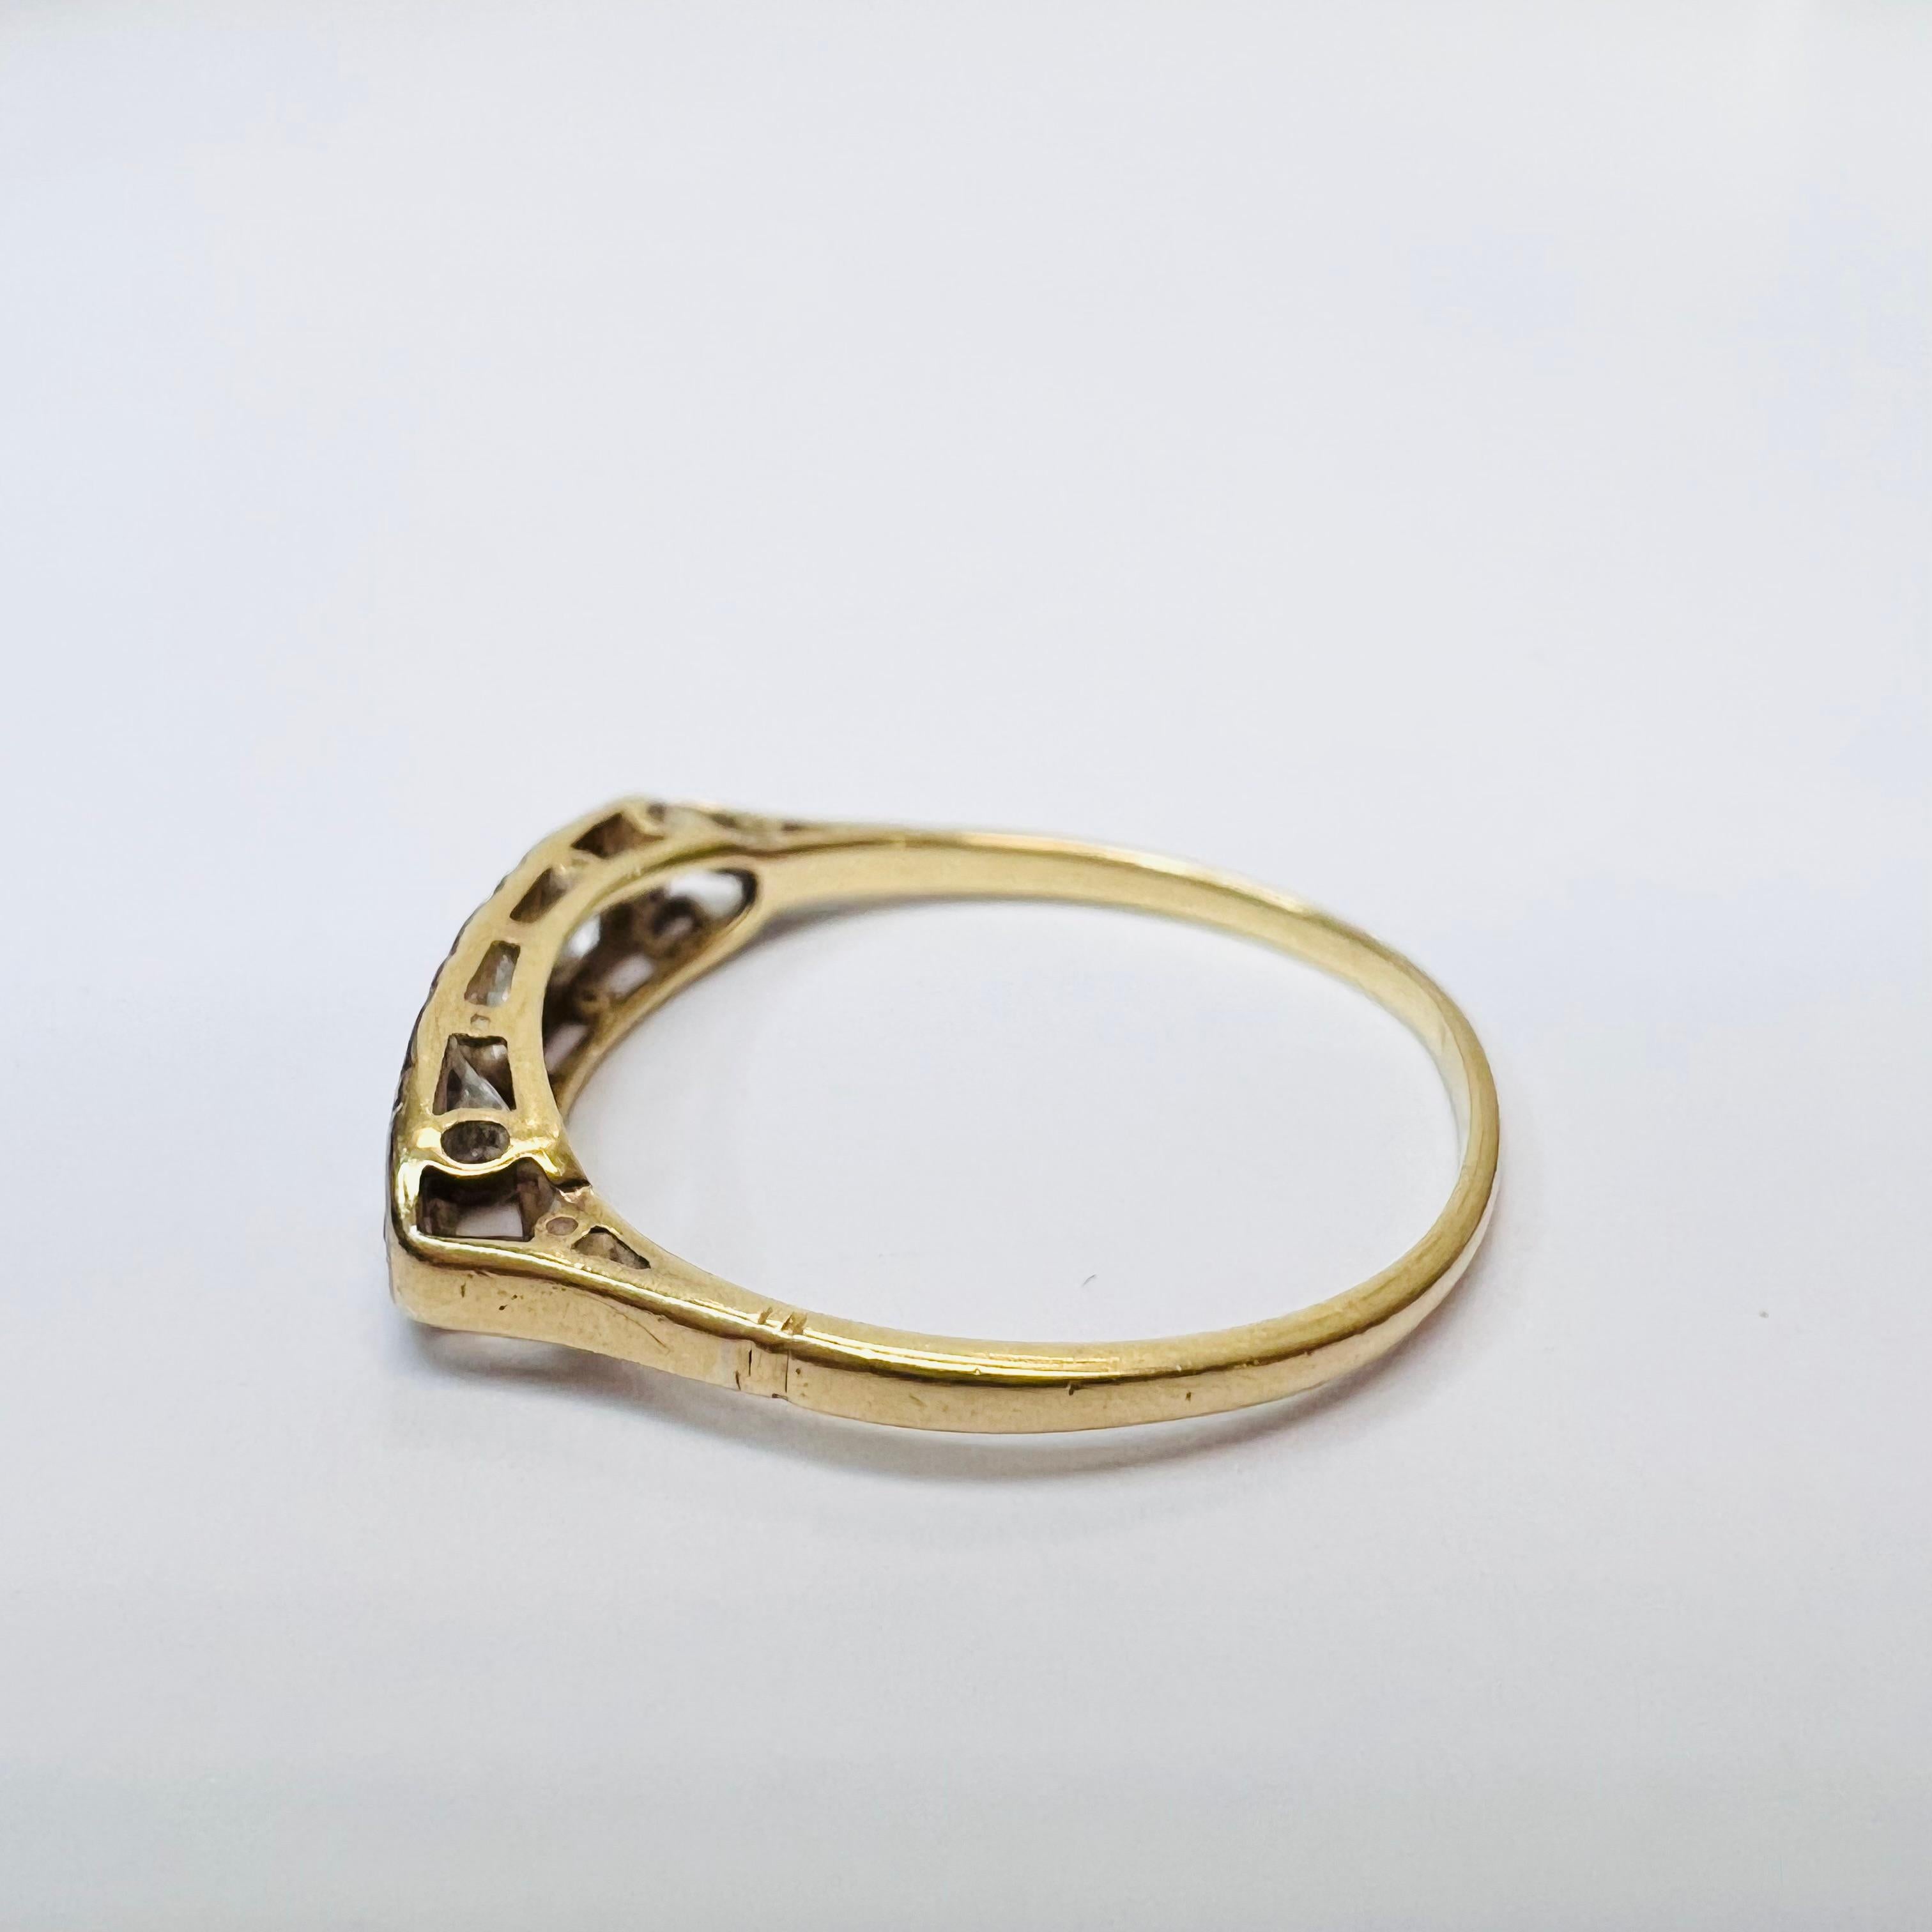 Presenting a,

An Antique Ring with bezel set diamonds on a platinum and 18K yellow gold ring band.

The Diamonds are natural and earth mined stone.

The diamonds are approximately .45CTW

The Ring is 17x4mm wide, 3.5mm Rise and 1mm shank

Weight